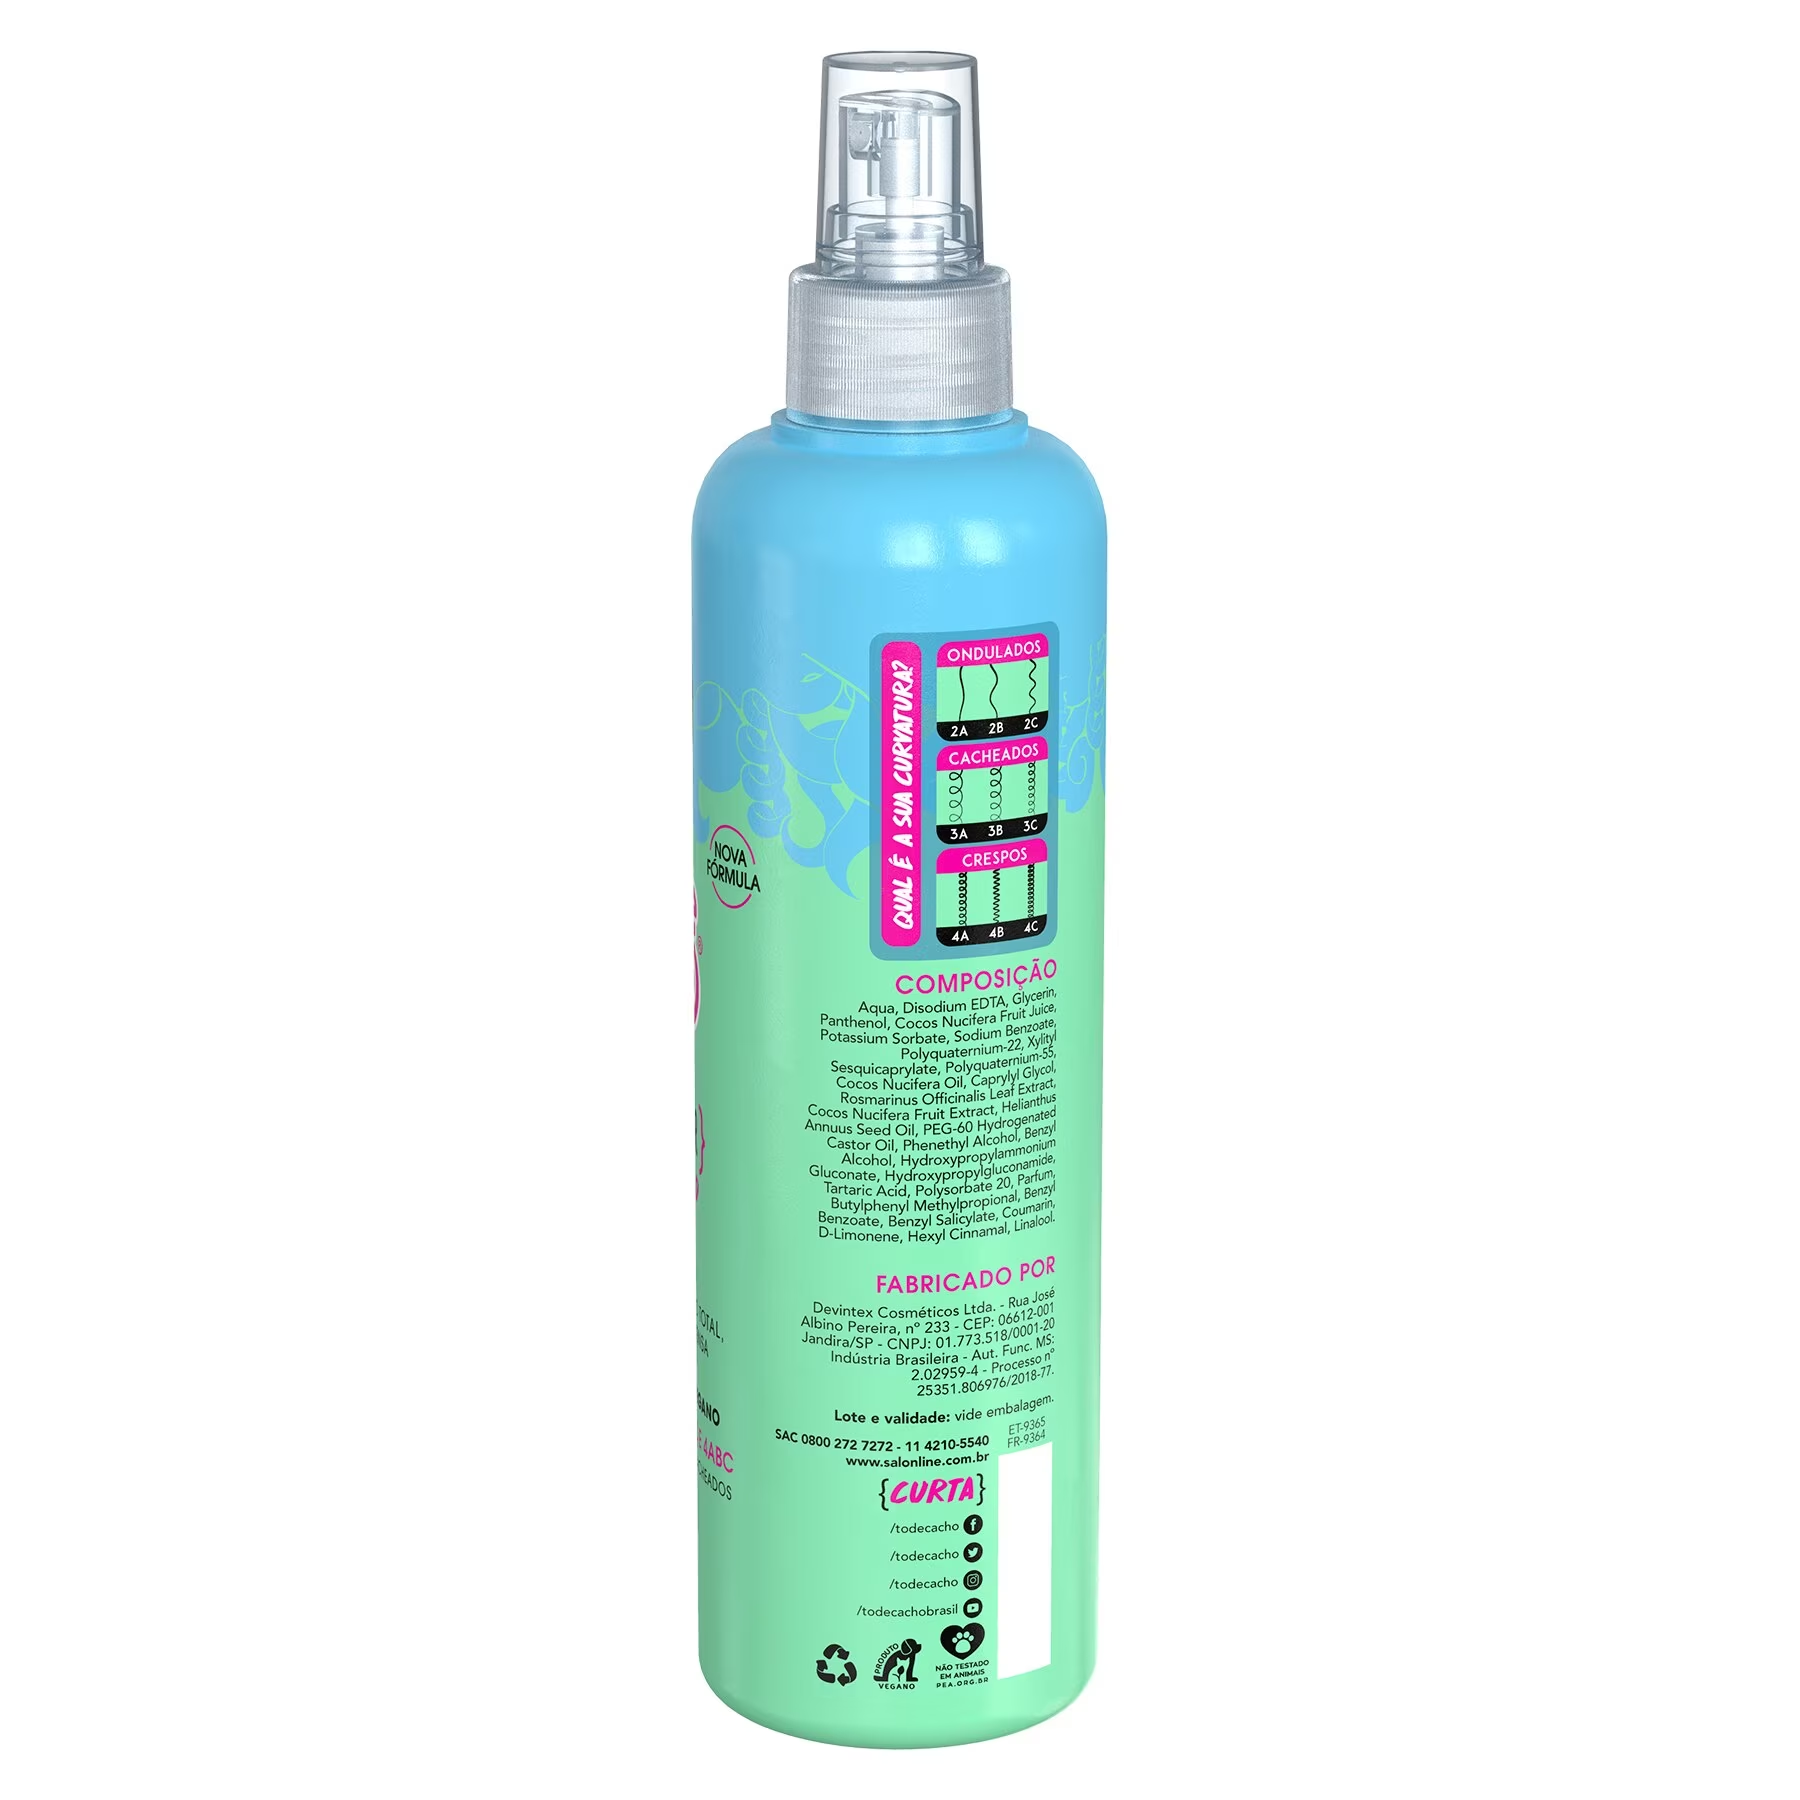 Spray Coco Day After #todecacho (300ml)